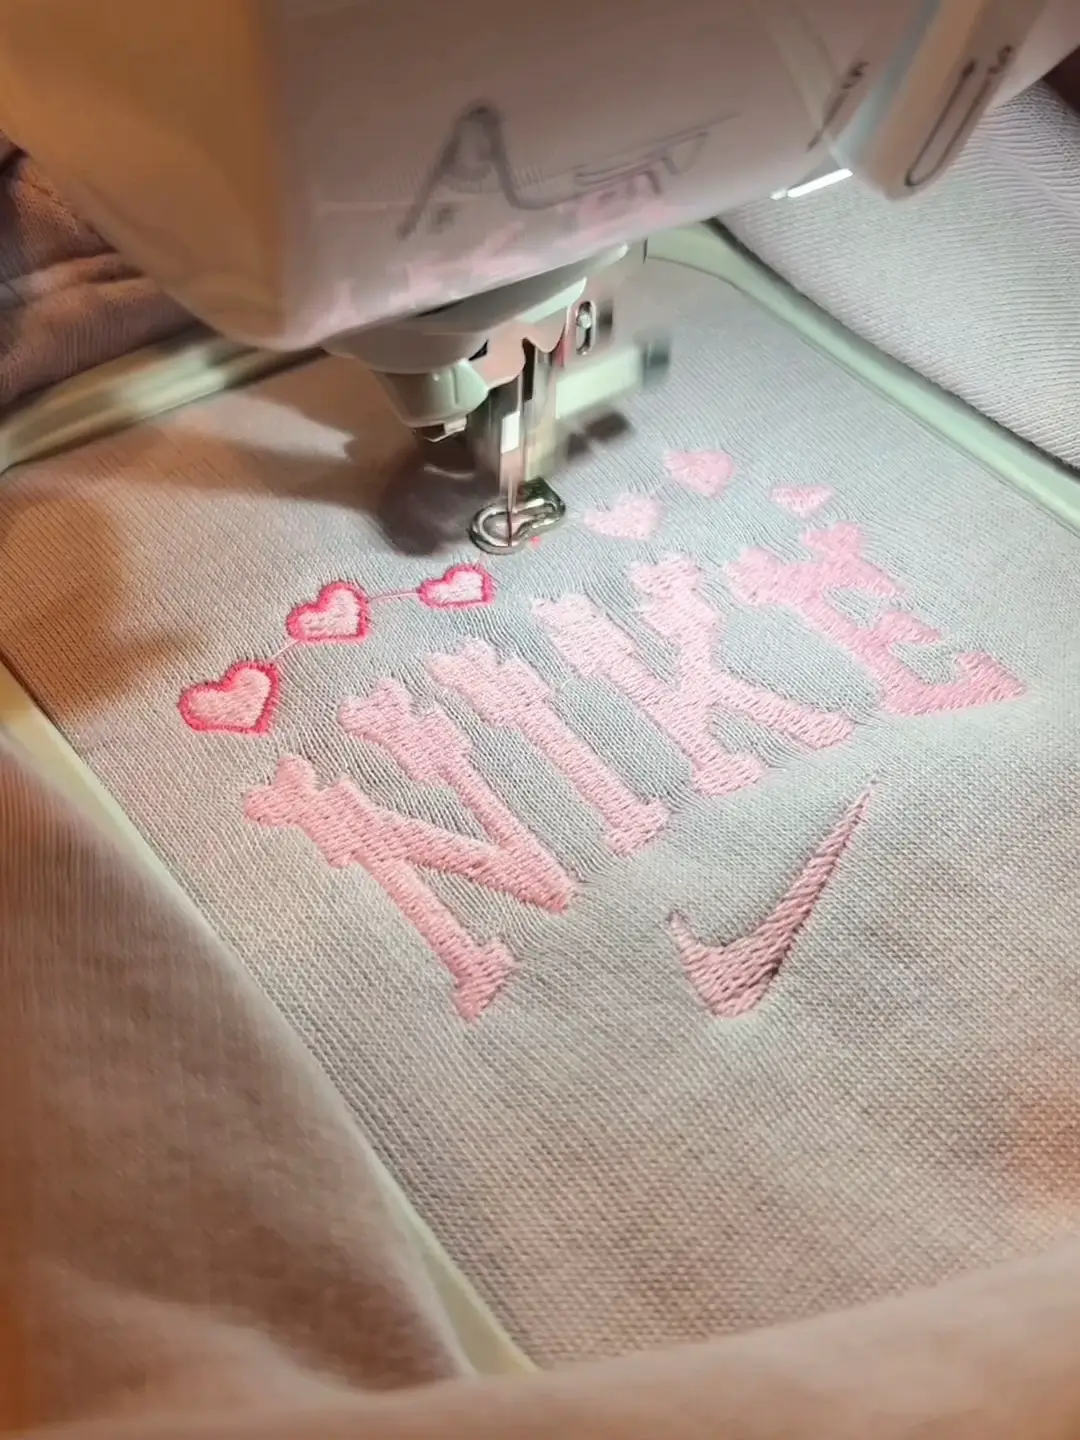 How to EMBROIDER with a Family machine!! 🔥 (VERY EASY) 😱 ENG SUBS 